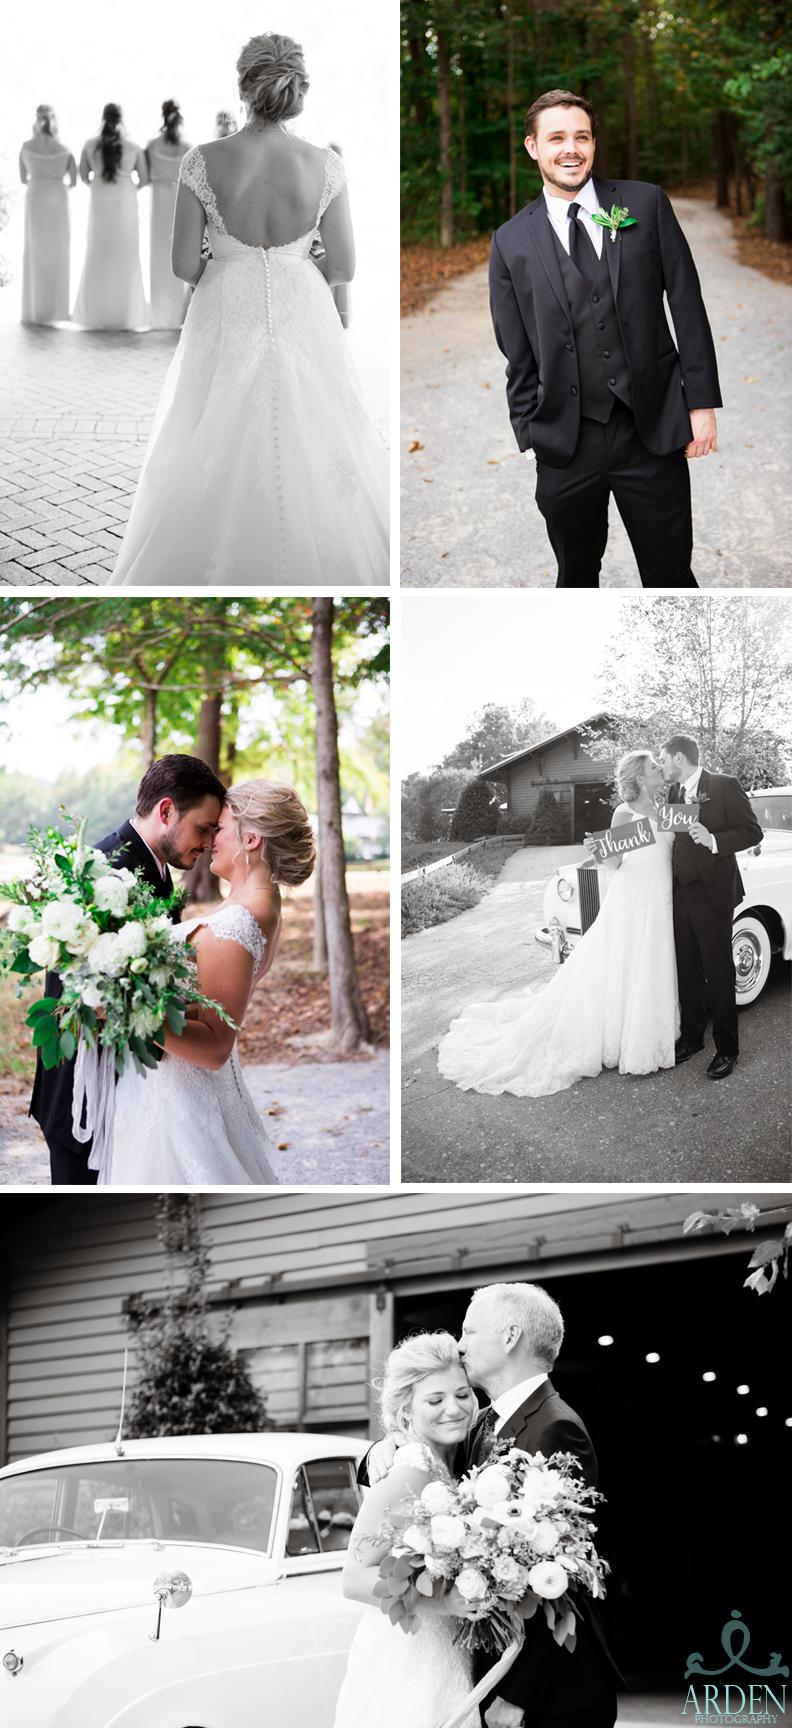  First looks for loved ones: friends, family, and groom. 